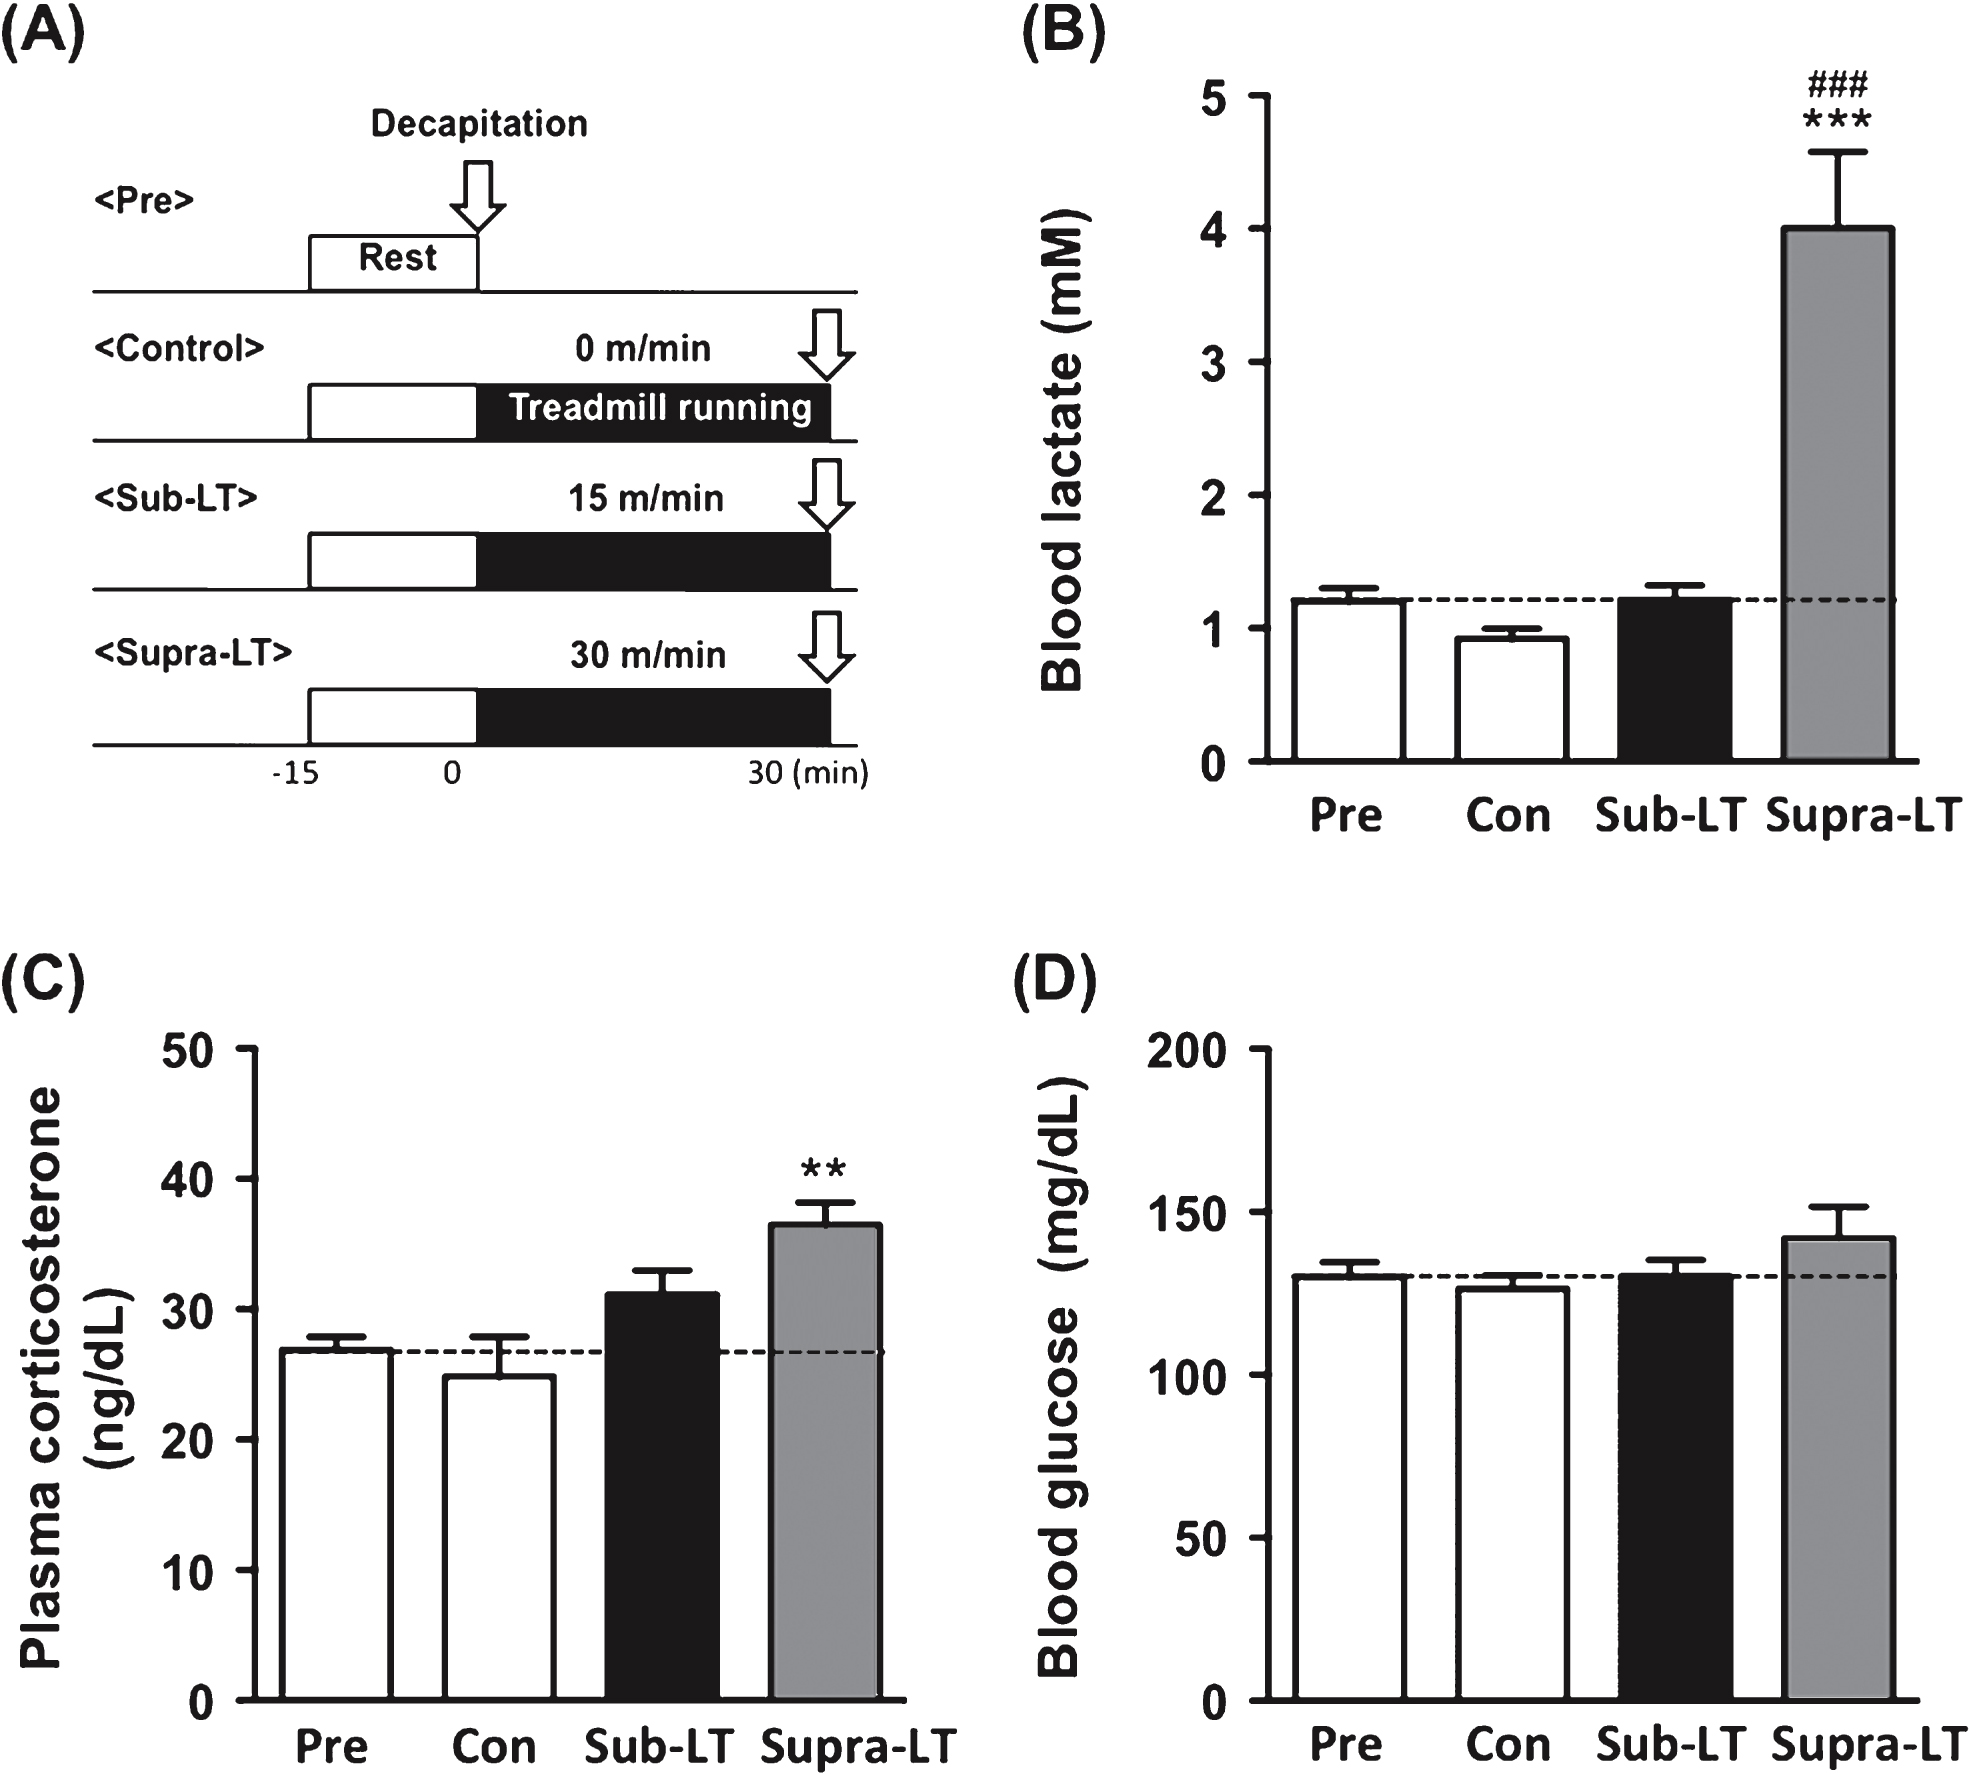 Determination of blood lactate, glucose, and plasma corticosterone after different intensities of exercise (A) Protocols for different intensities of exercise, (B) blood lactate levels (F (3,24)  = 23.47, p <  0.0001), (C) plasma corticosterone levels (F (3,24)  = 6.31, p = 0.0026), and (D) blood glucose levels (F (3,24)  = 1.17, p = 0.34). Data represent the mean ± SEM (n = 7 mice per group). **, p <  0.01, ***, p <  0.001 in comparison with control and # # # , p <  0.001 in comparison to sub-LT (one-way ANOVA Tukey post hoc tests).